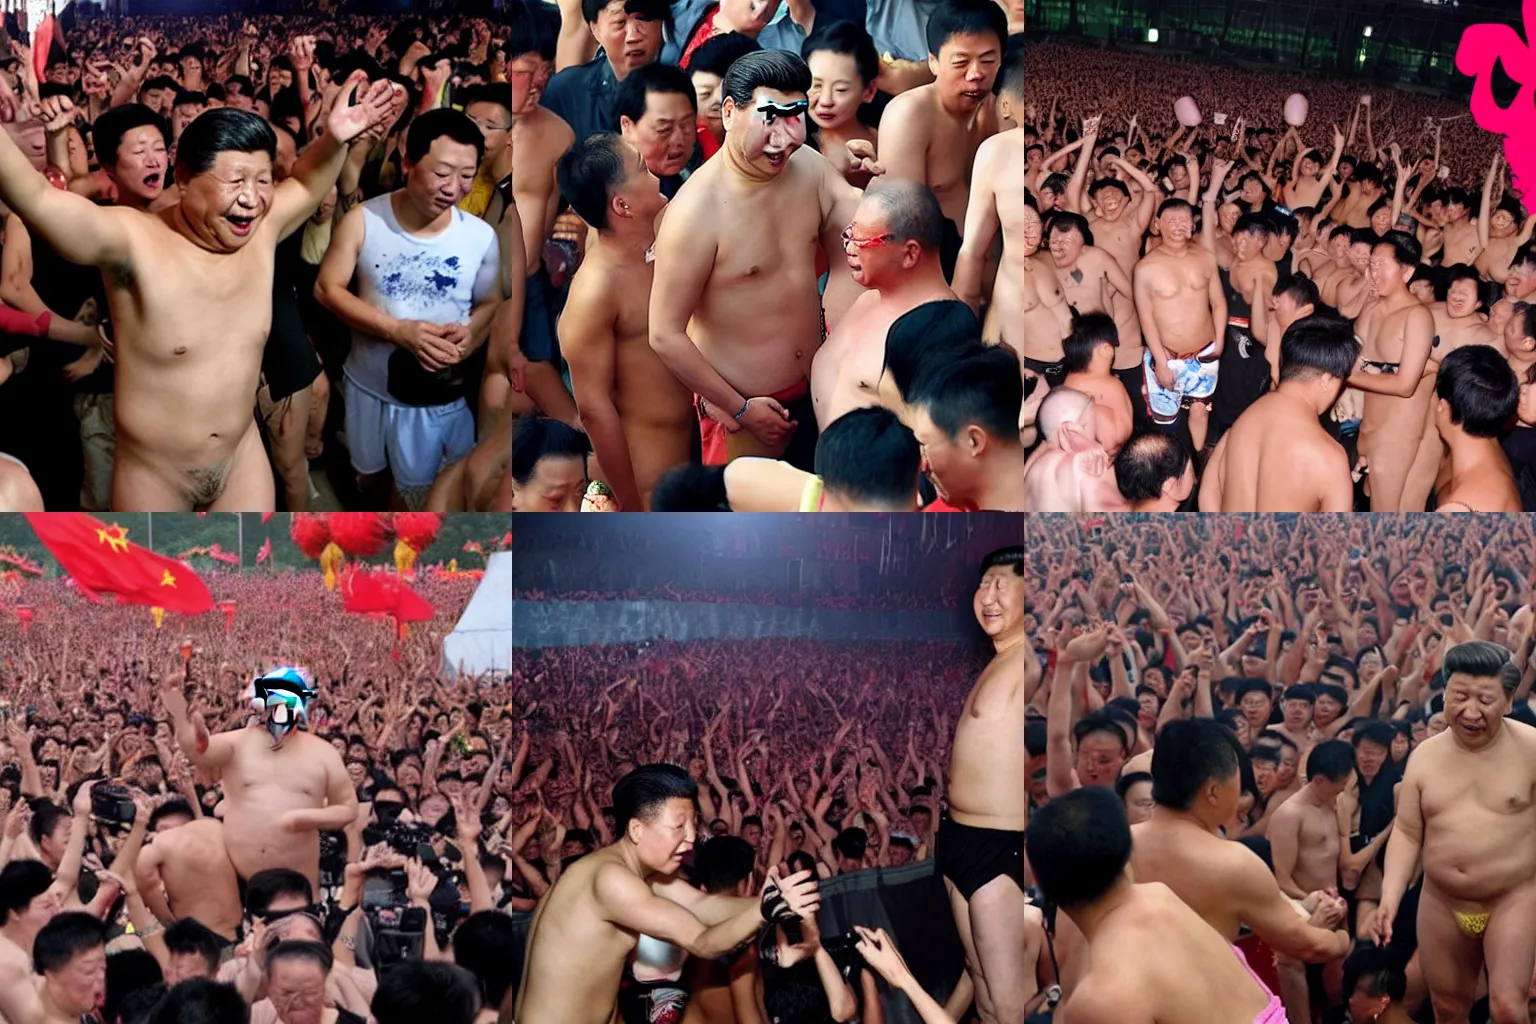 Prompt: xi jinping shirtless at a thunderdome hardcore rave